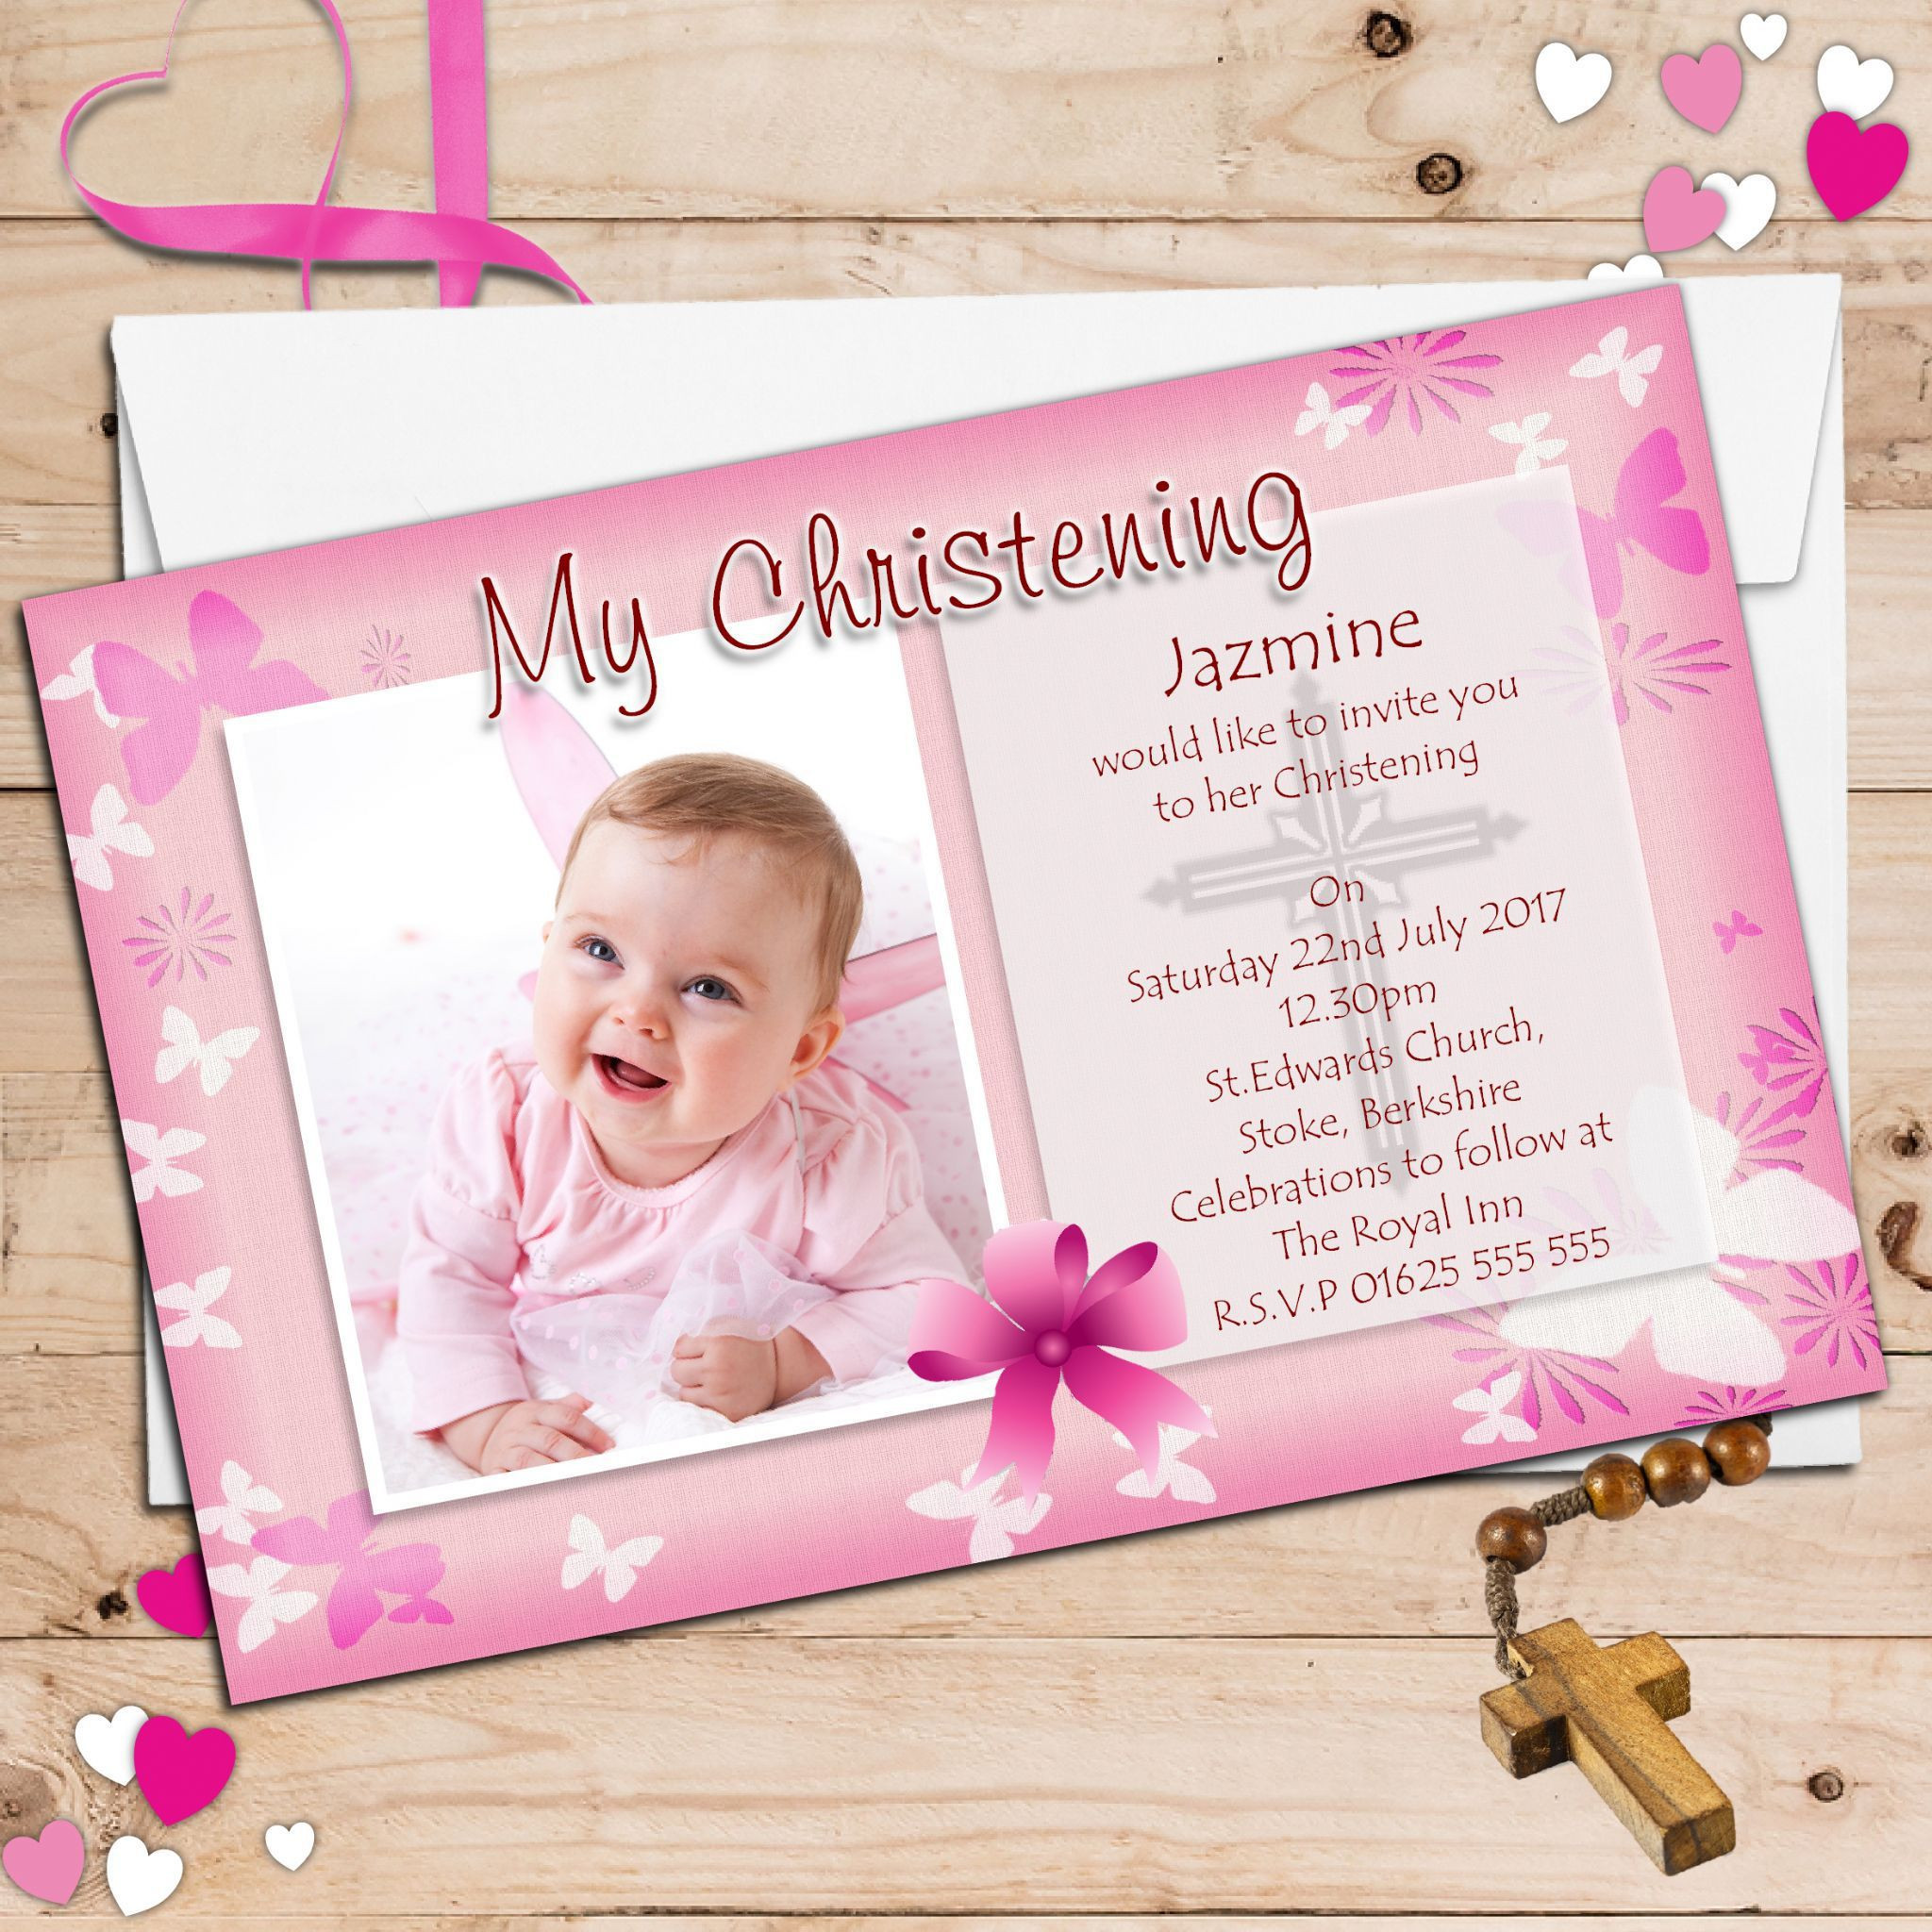 1St Birthday And Baptism Combined Invitations
 1st Birthday And Baptism Invitations 1st Birthday And